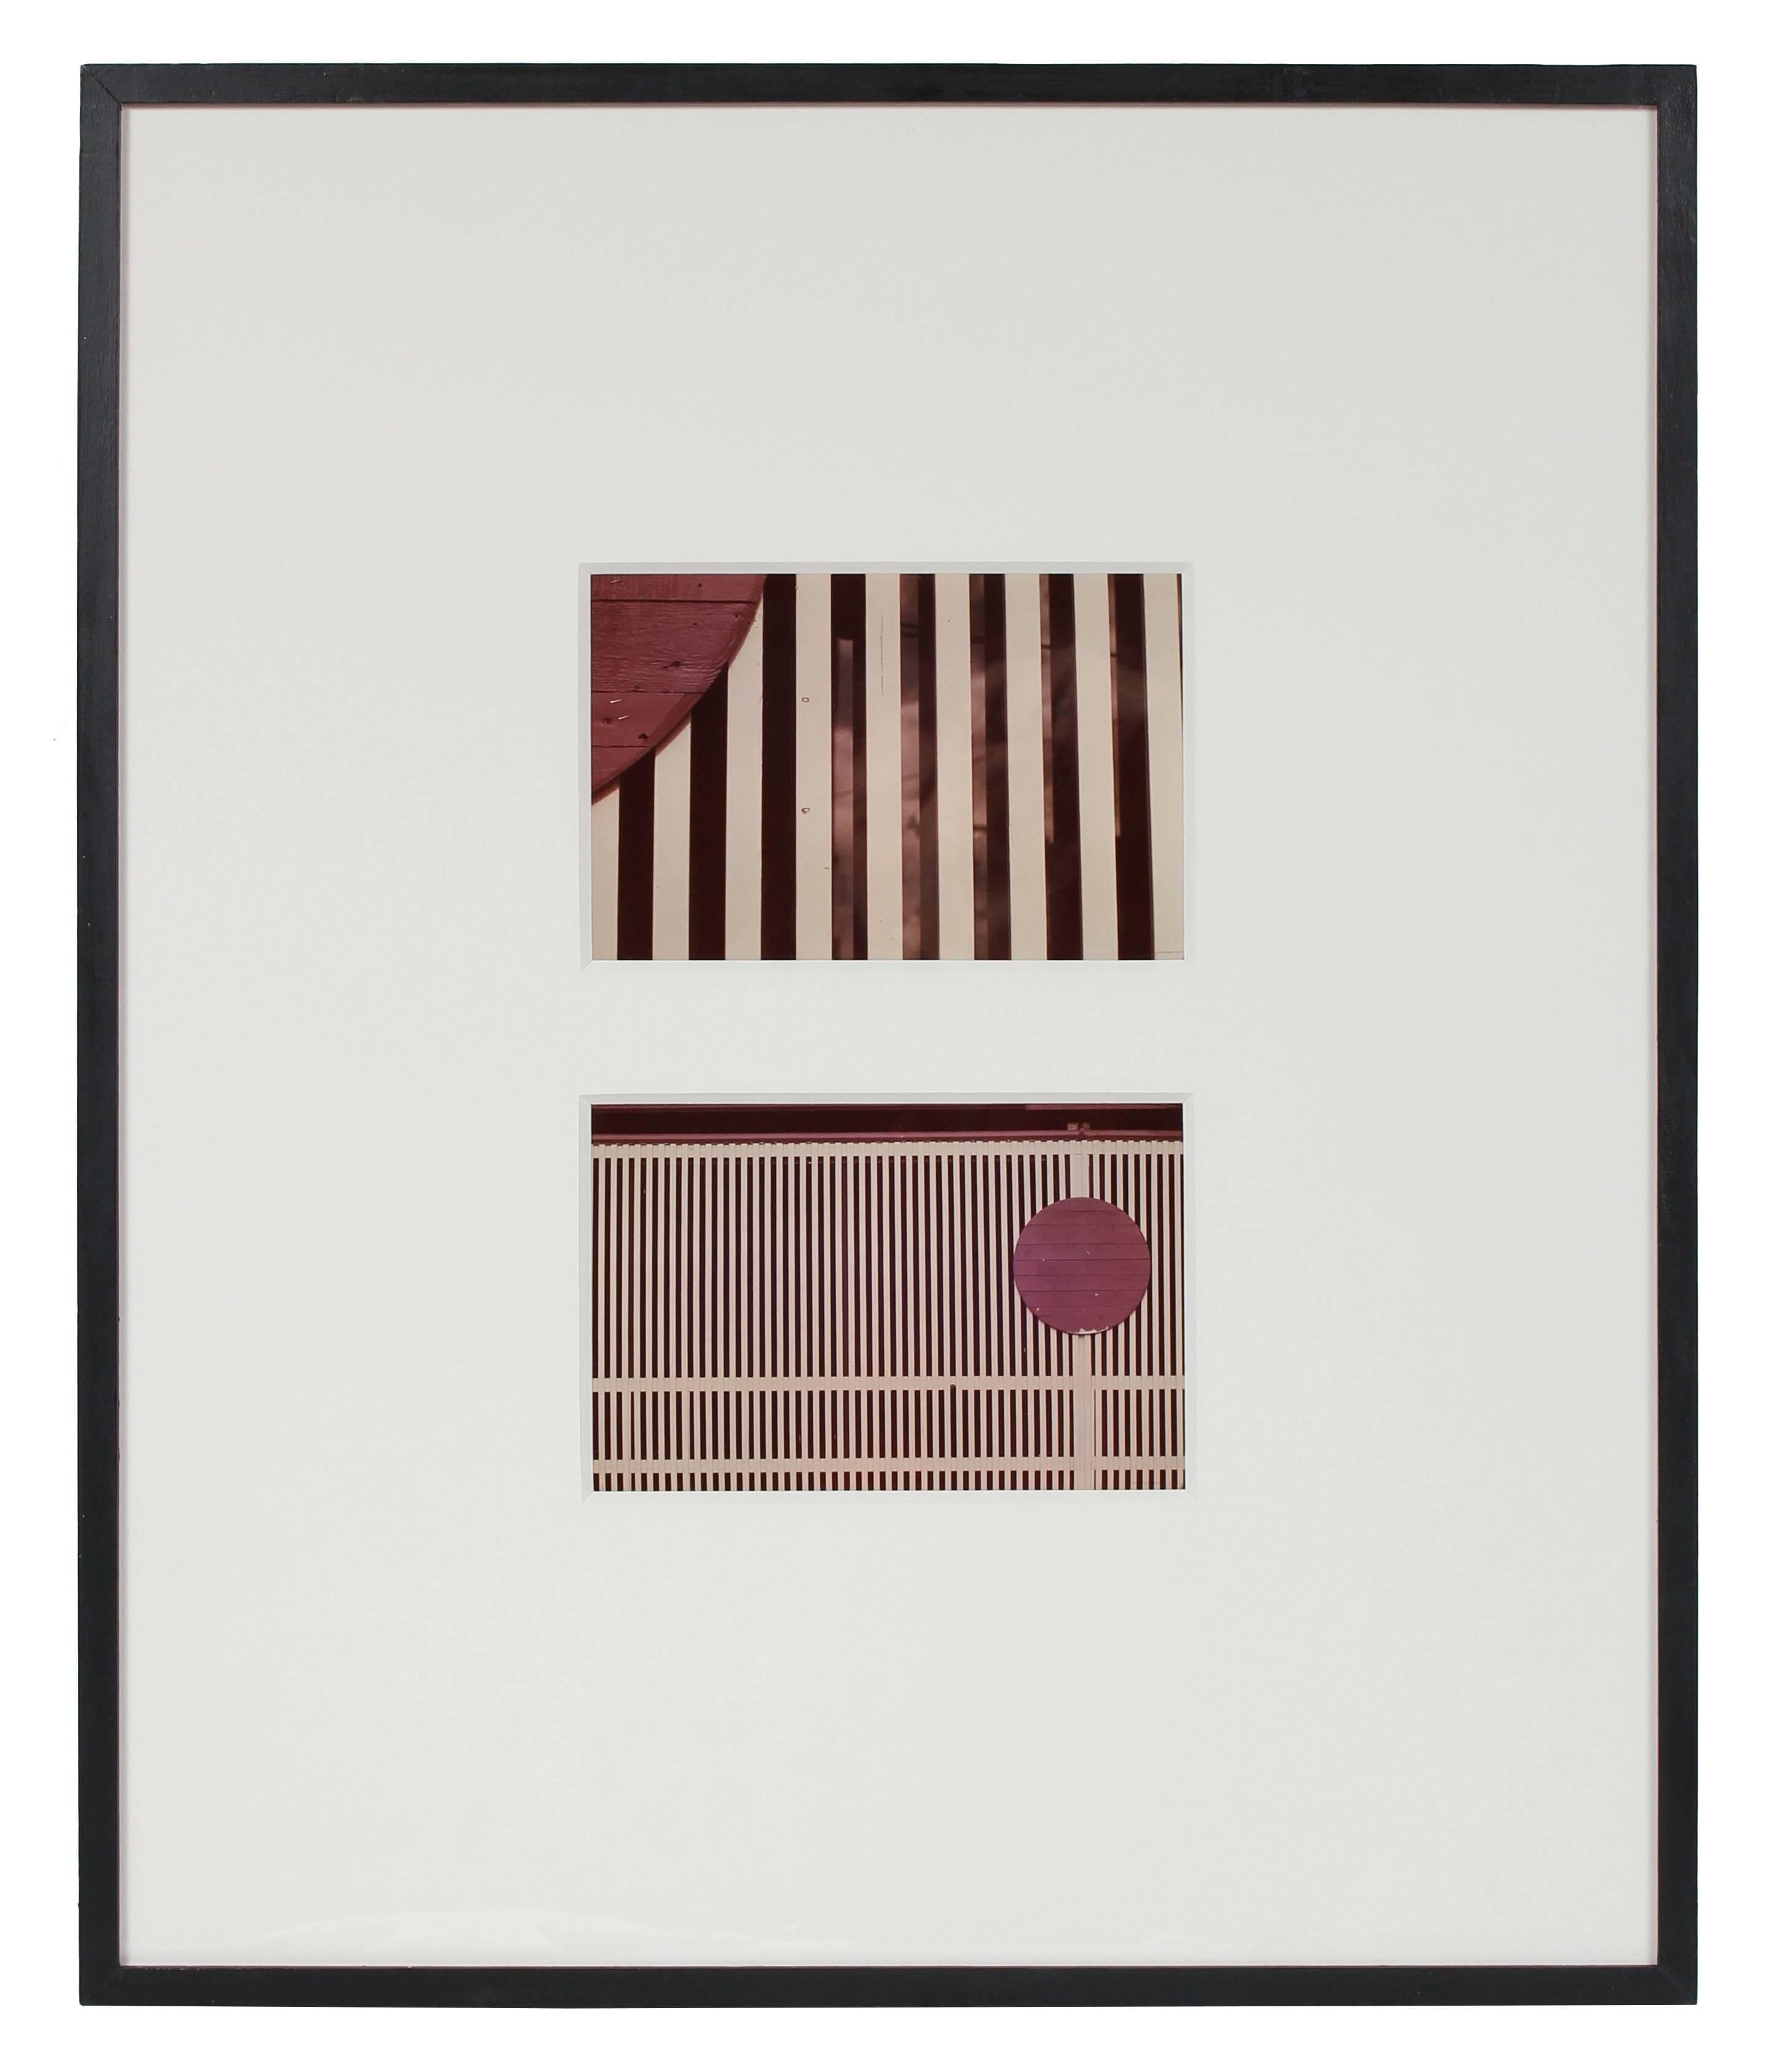 This 1970s abstract color photograph with vertical lines entitled "City Art 70" is by New York/San Francisco photographer Roz Joseph (b. 1926). Joseph travelled extensively through Europe, North Africa, and Asia in the 1960s shooting in black and